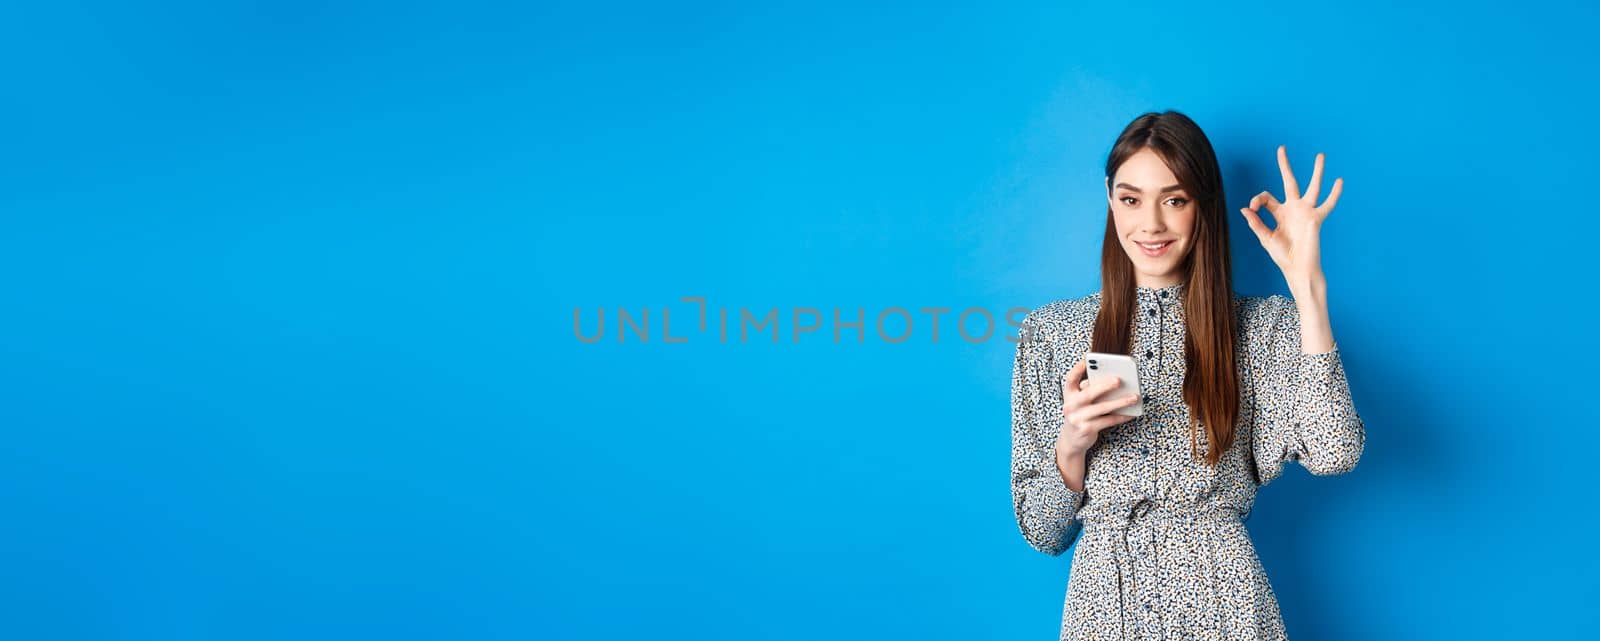 Beautiful young woman in dress showing okay sign and using smartphone, smiling at camera, standing on blue background.